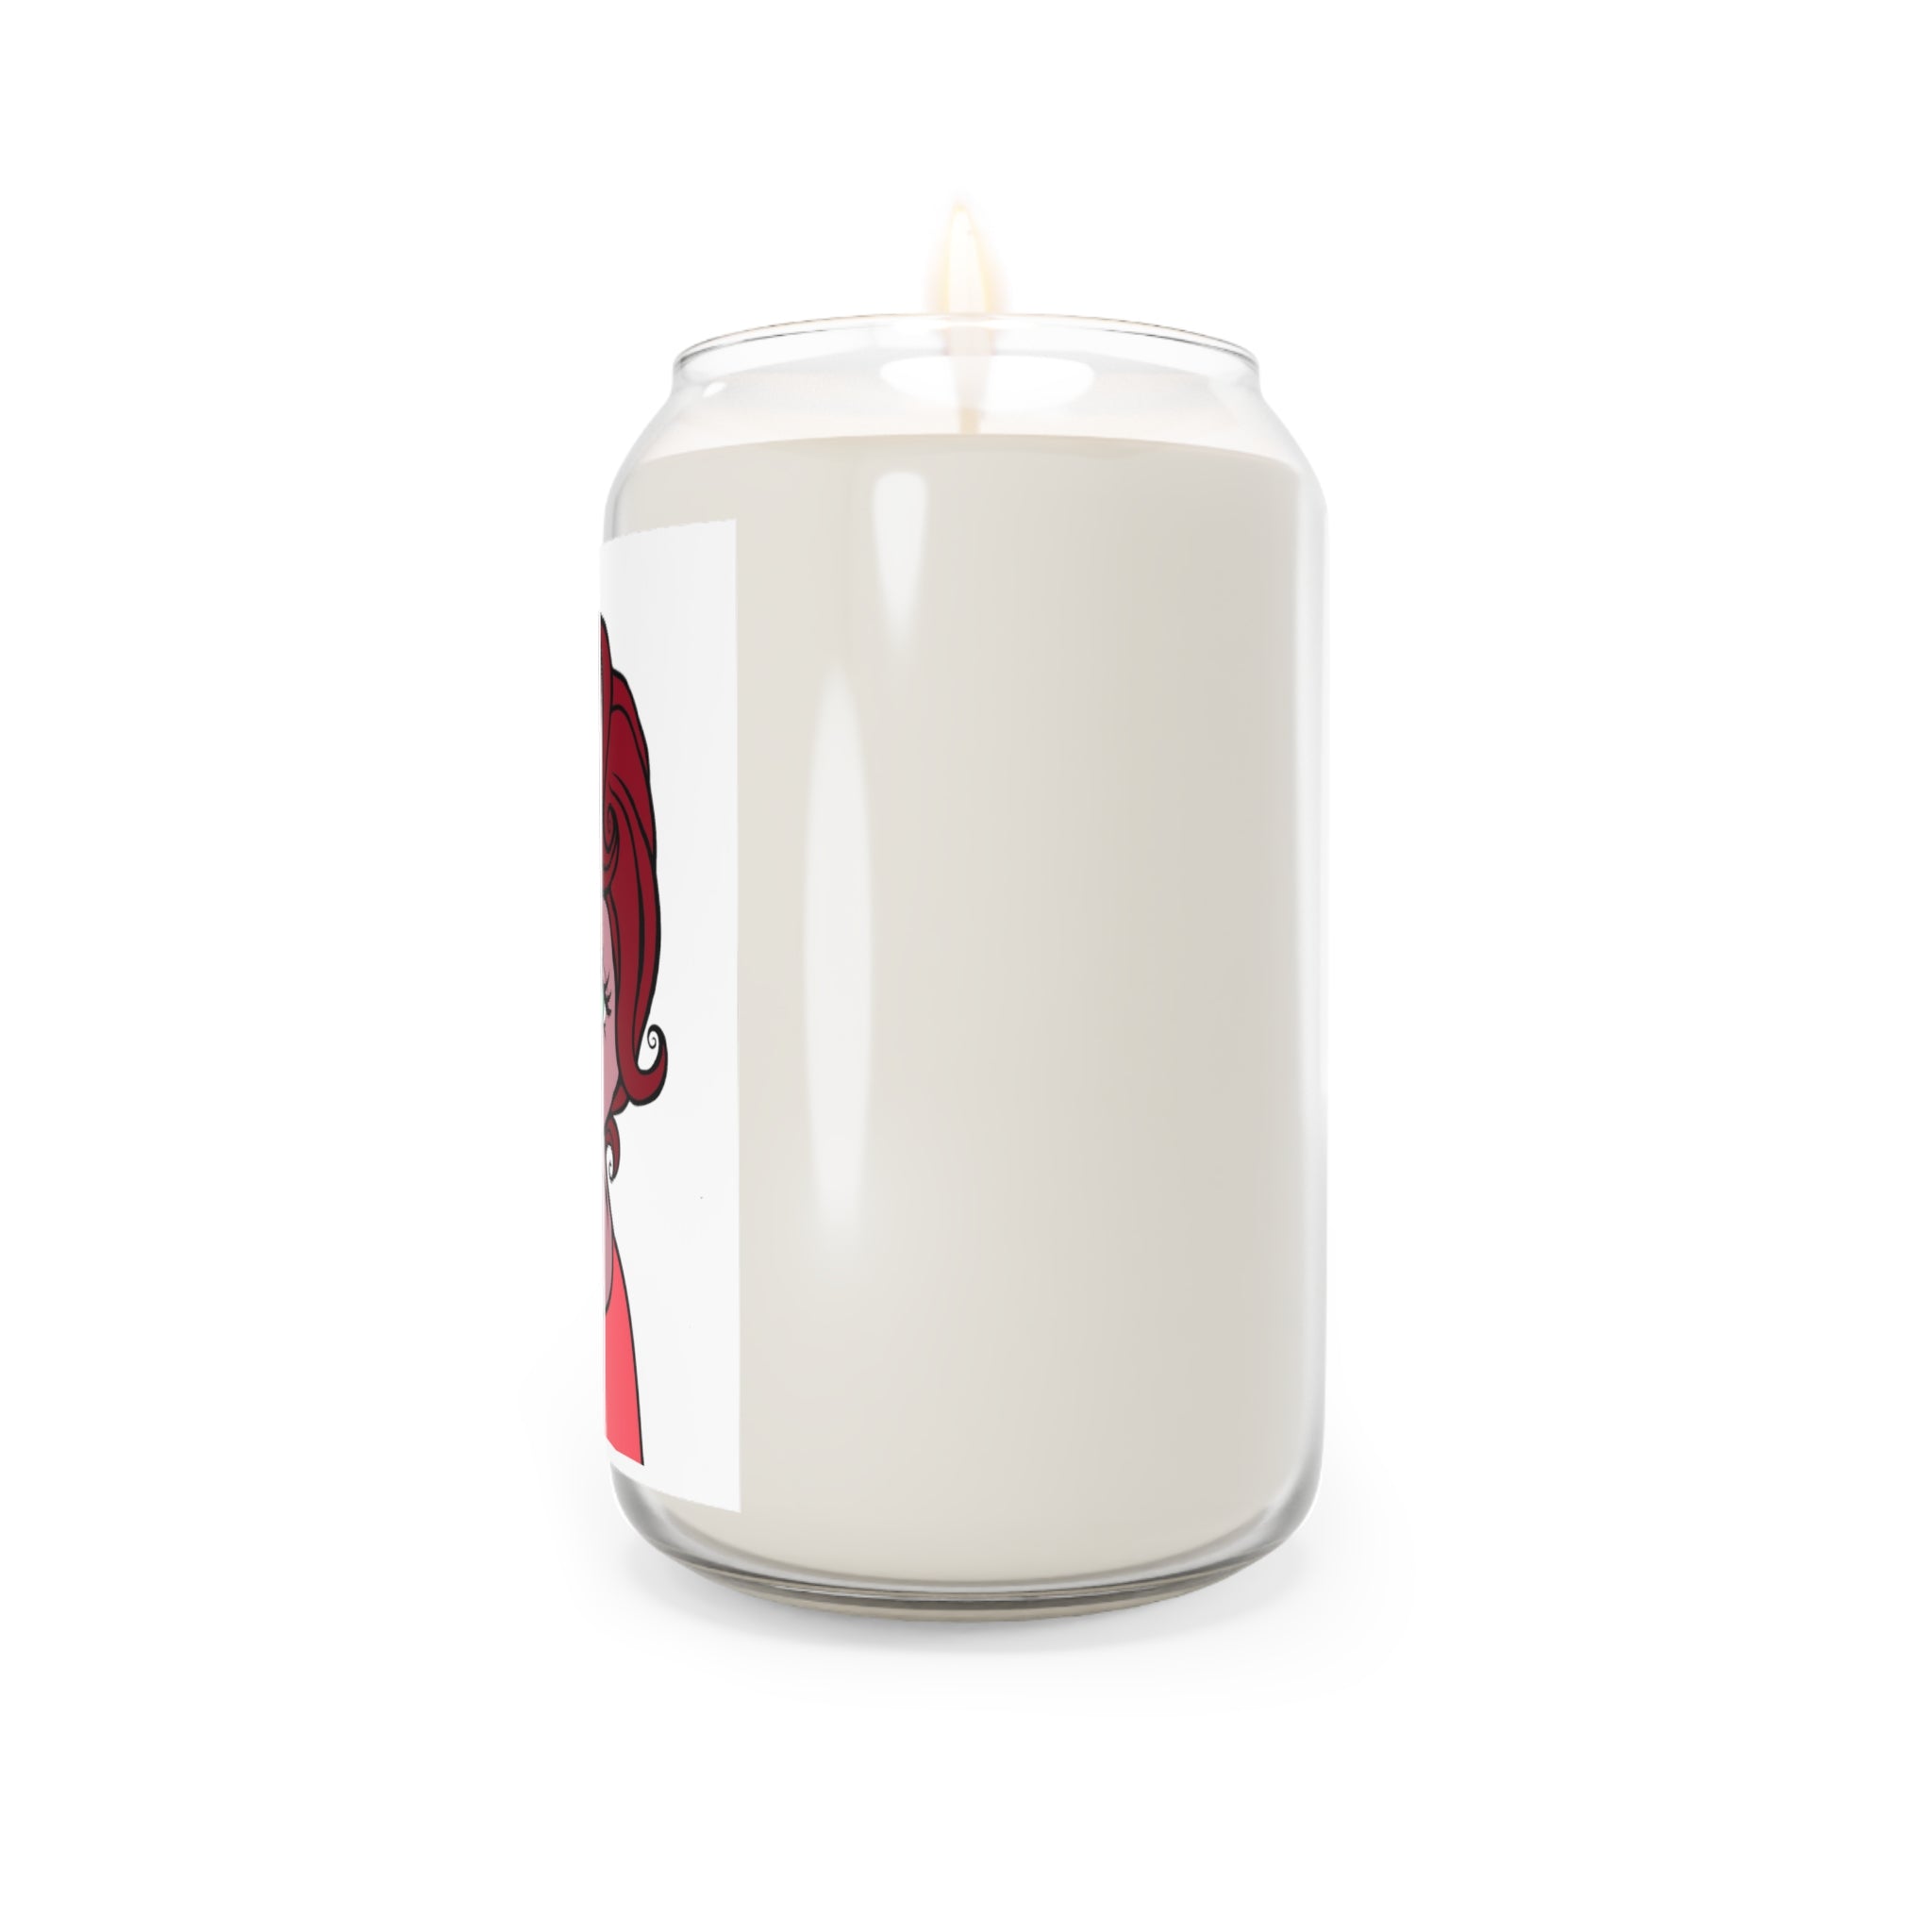 Miss Libra Scented Candle LARGE